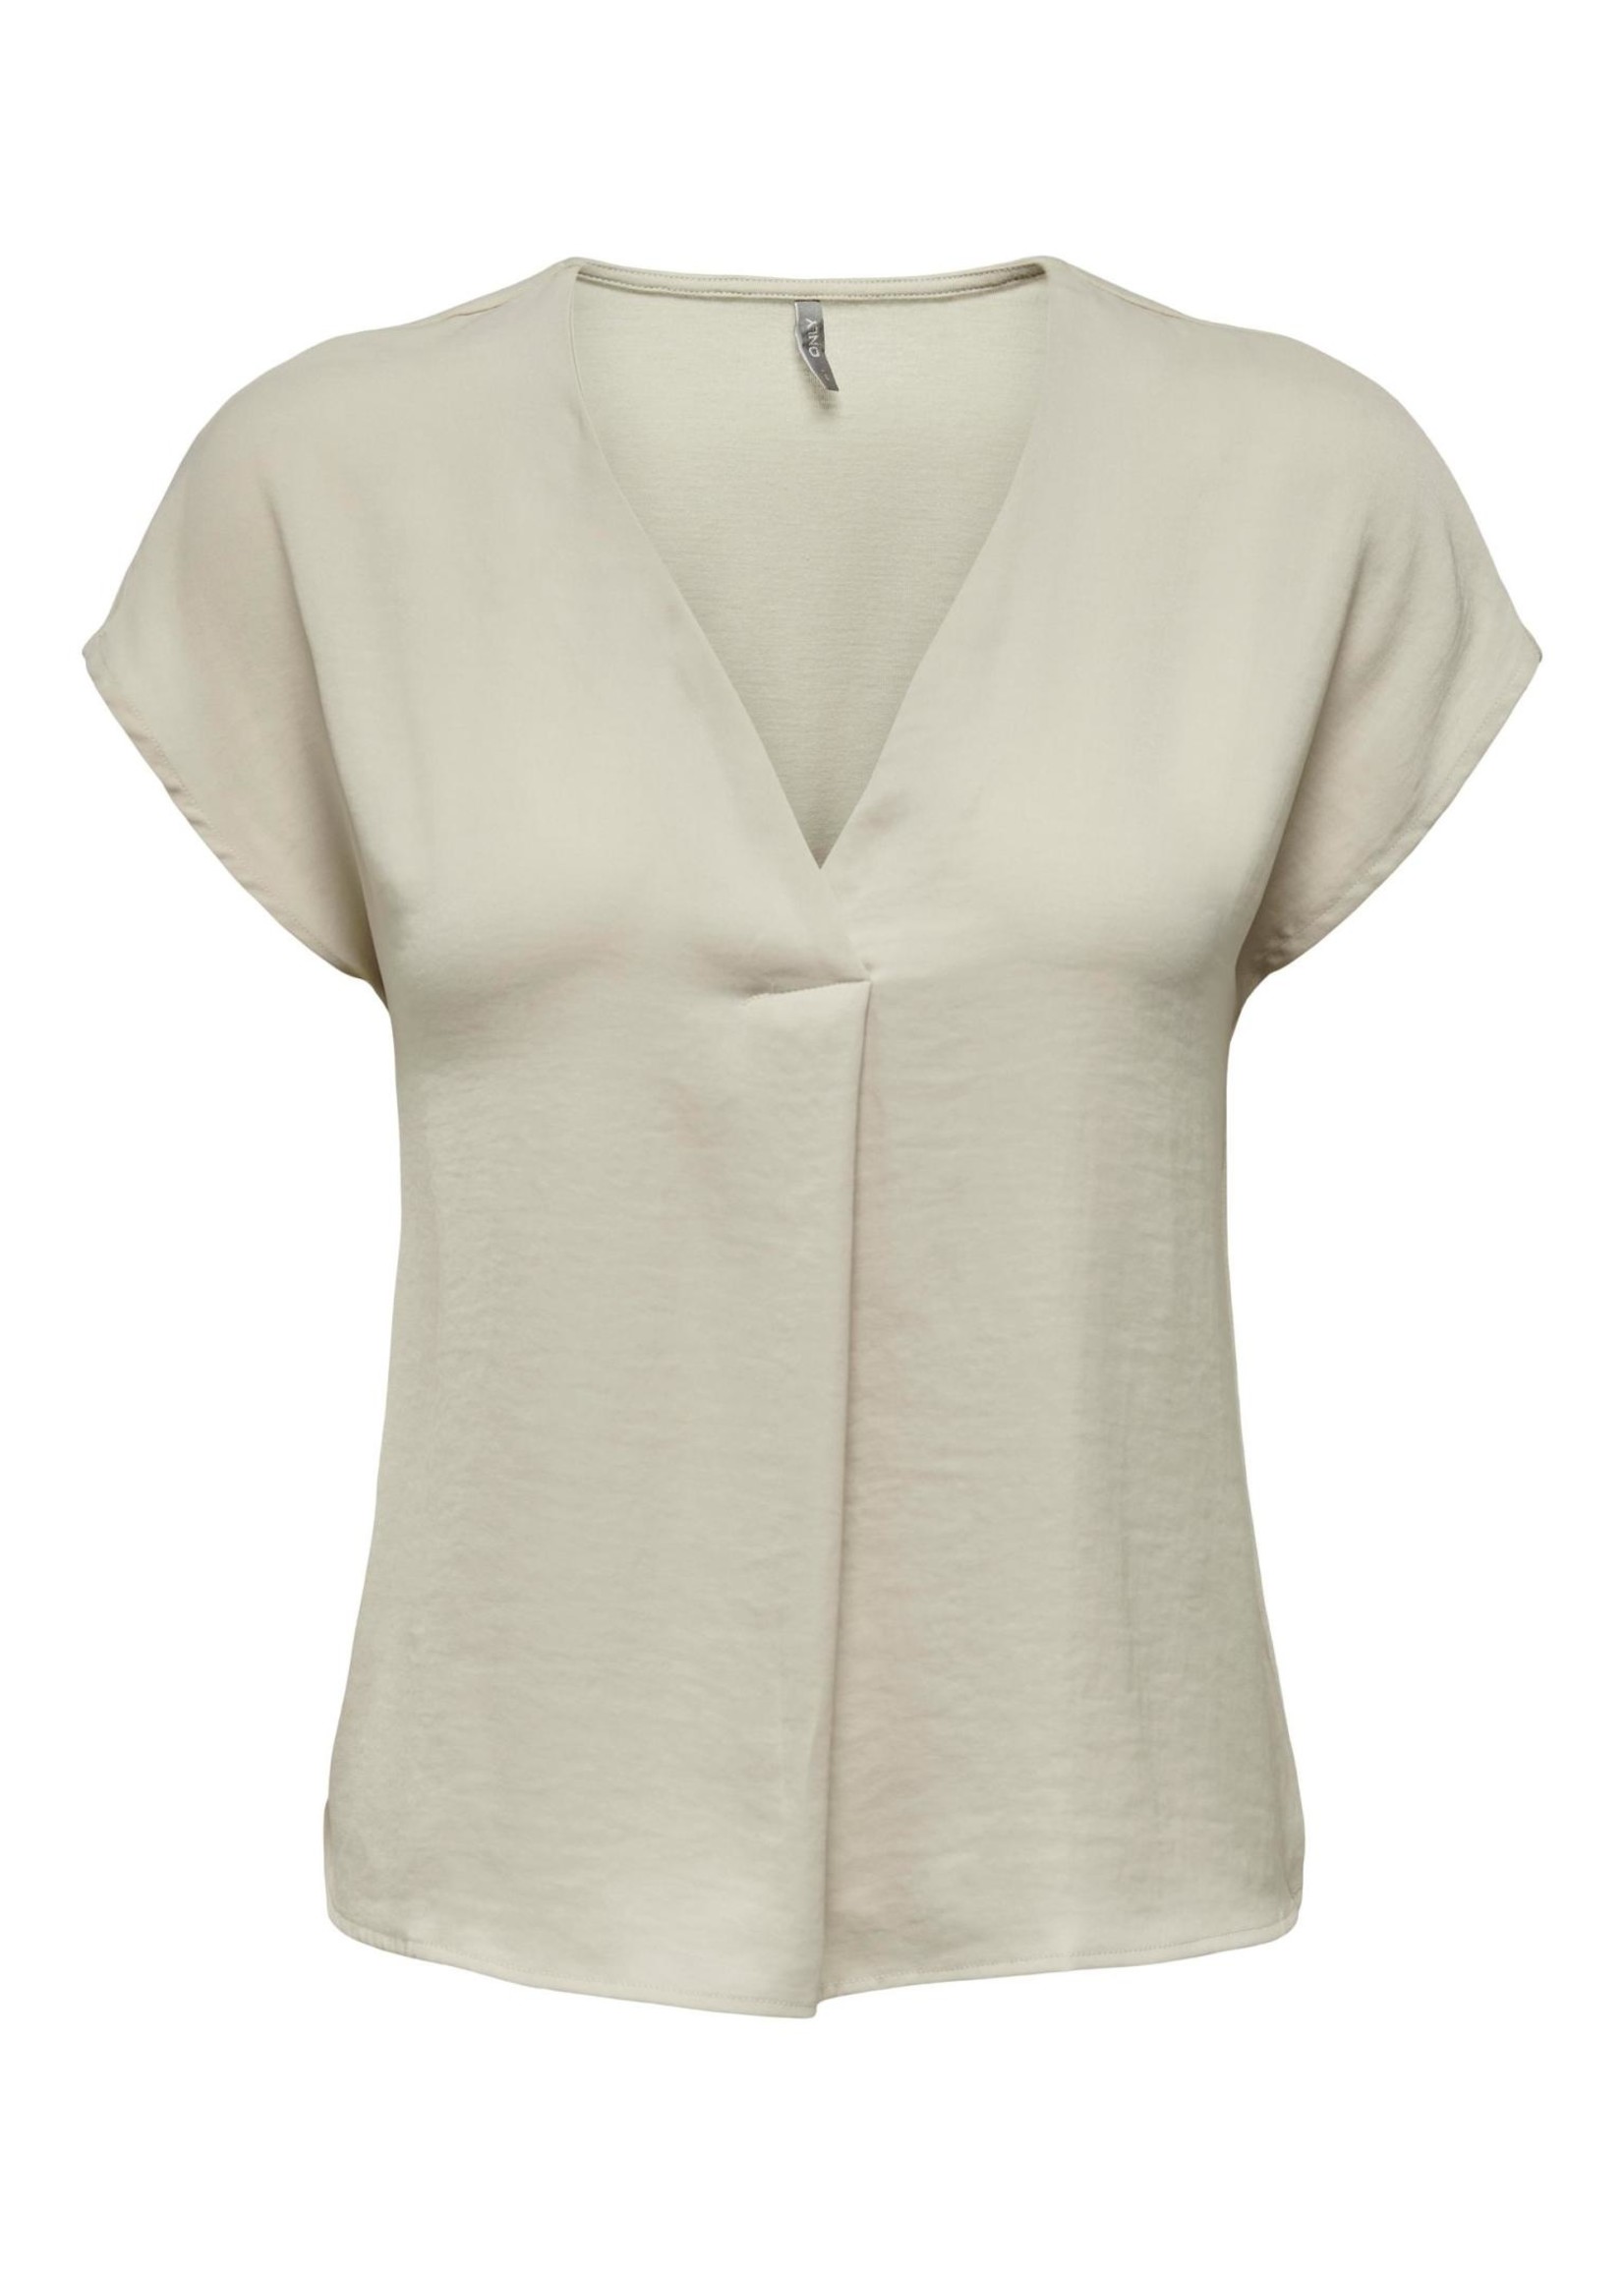 ONLY AVA S/S V-NECK TOP JRS pumice stone